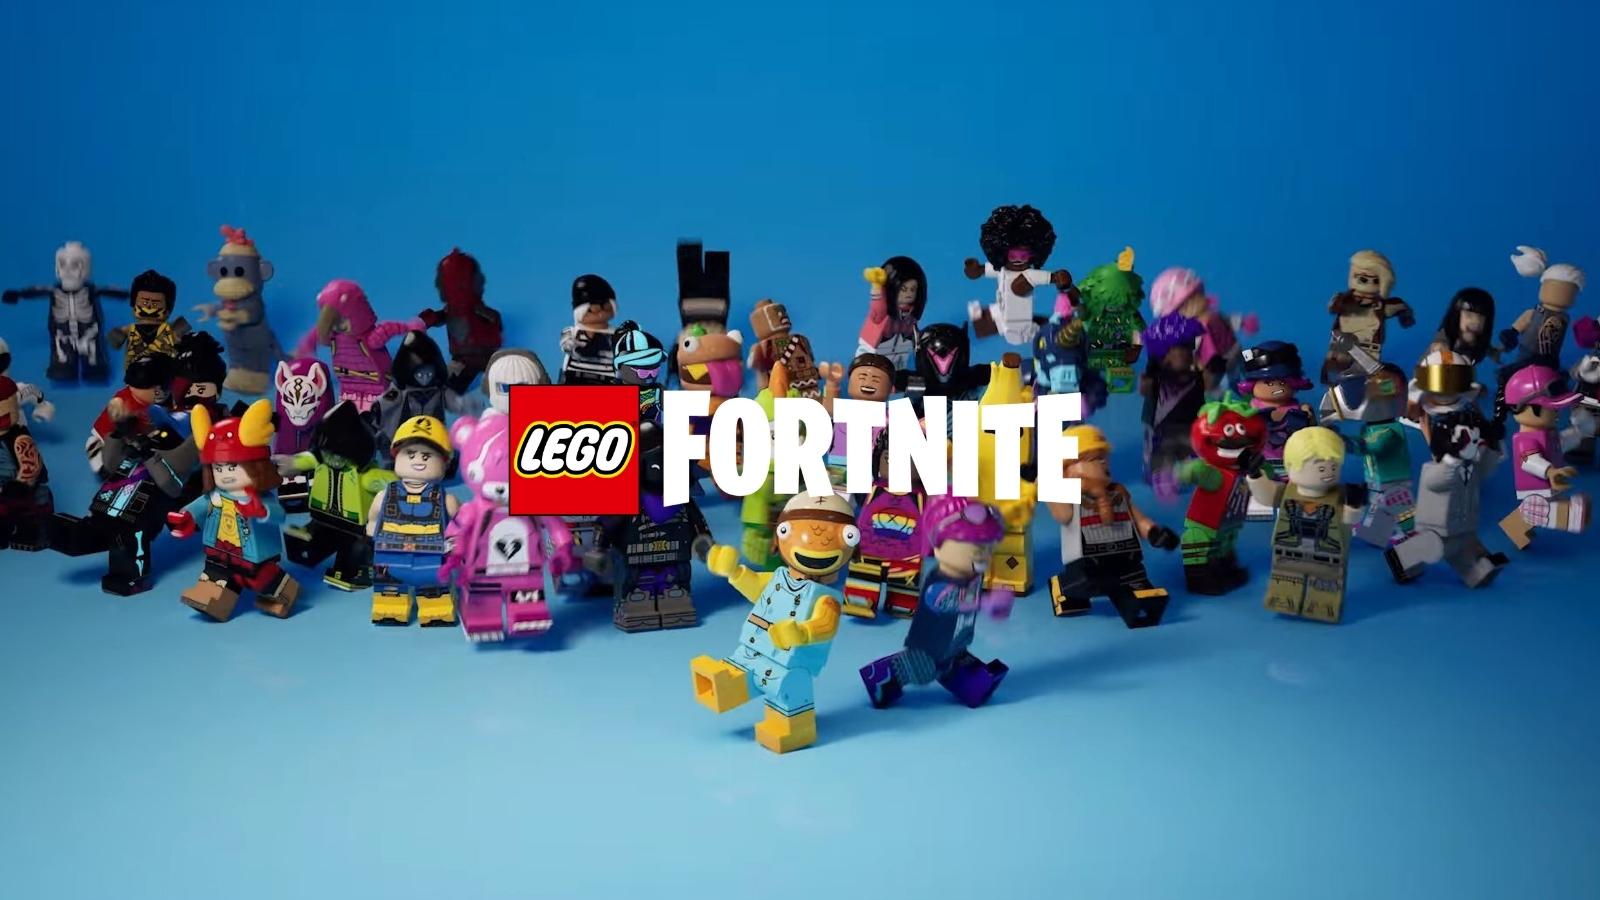 Fortnite Lego – when can we expect it?